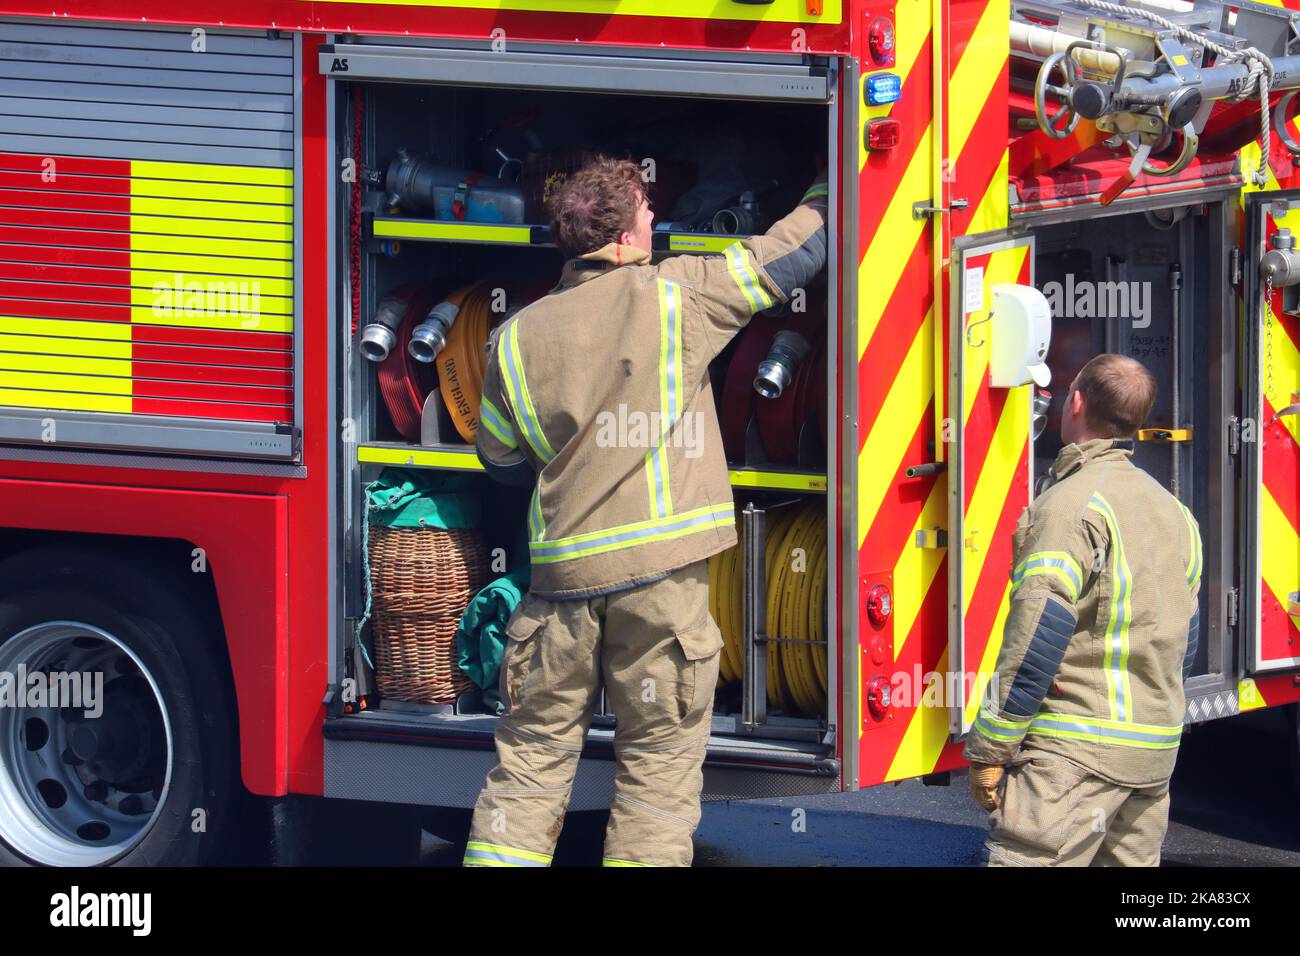 Firemen attending a a small fire in Bedfordshire, United, Kingdom. Stock Photo